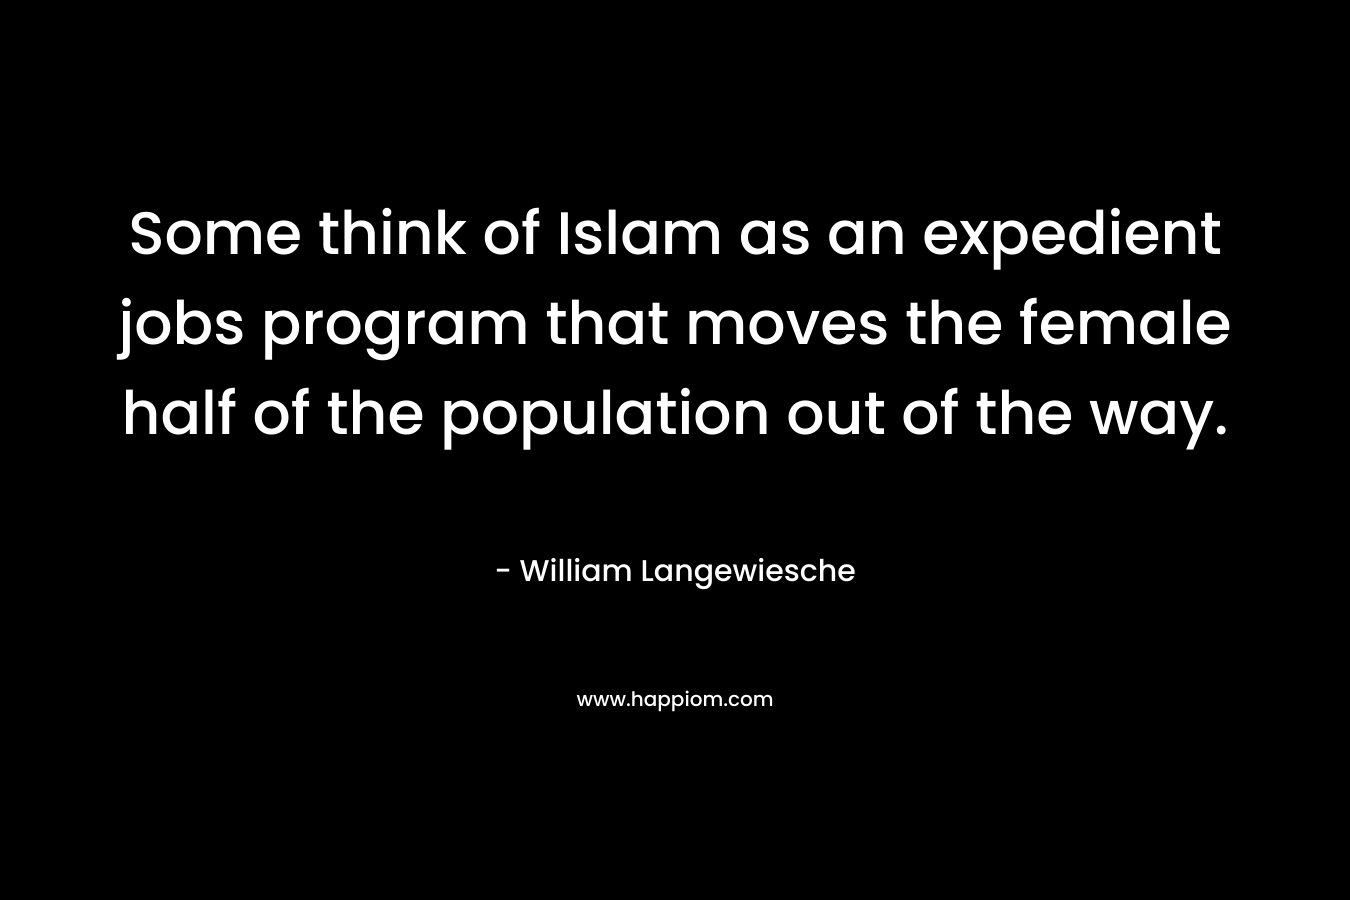 Some think of Islam as an expedient jobs program that moves the female half of the population out of the way. – William Langewiesche